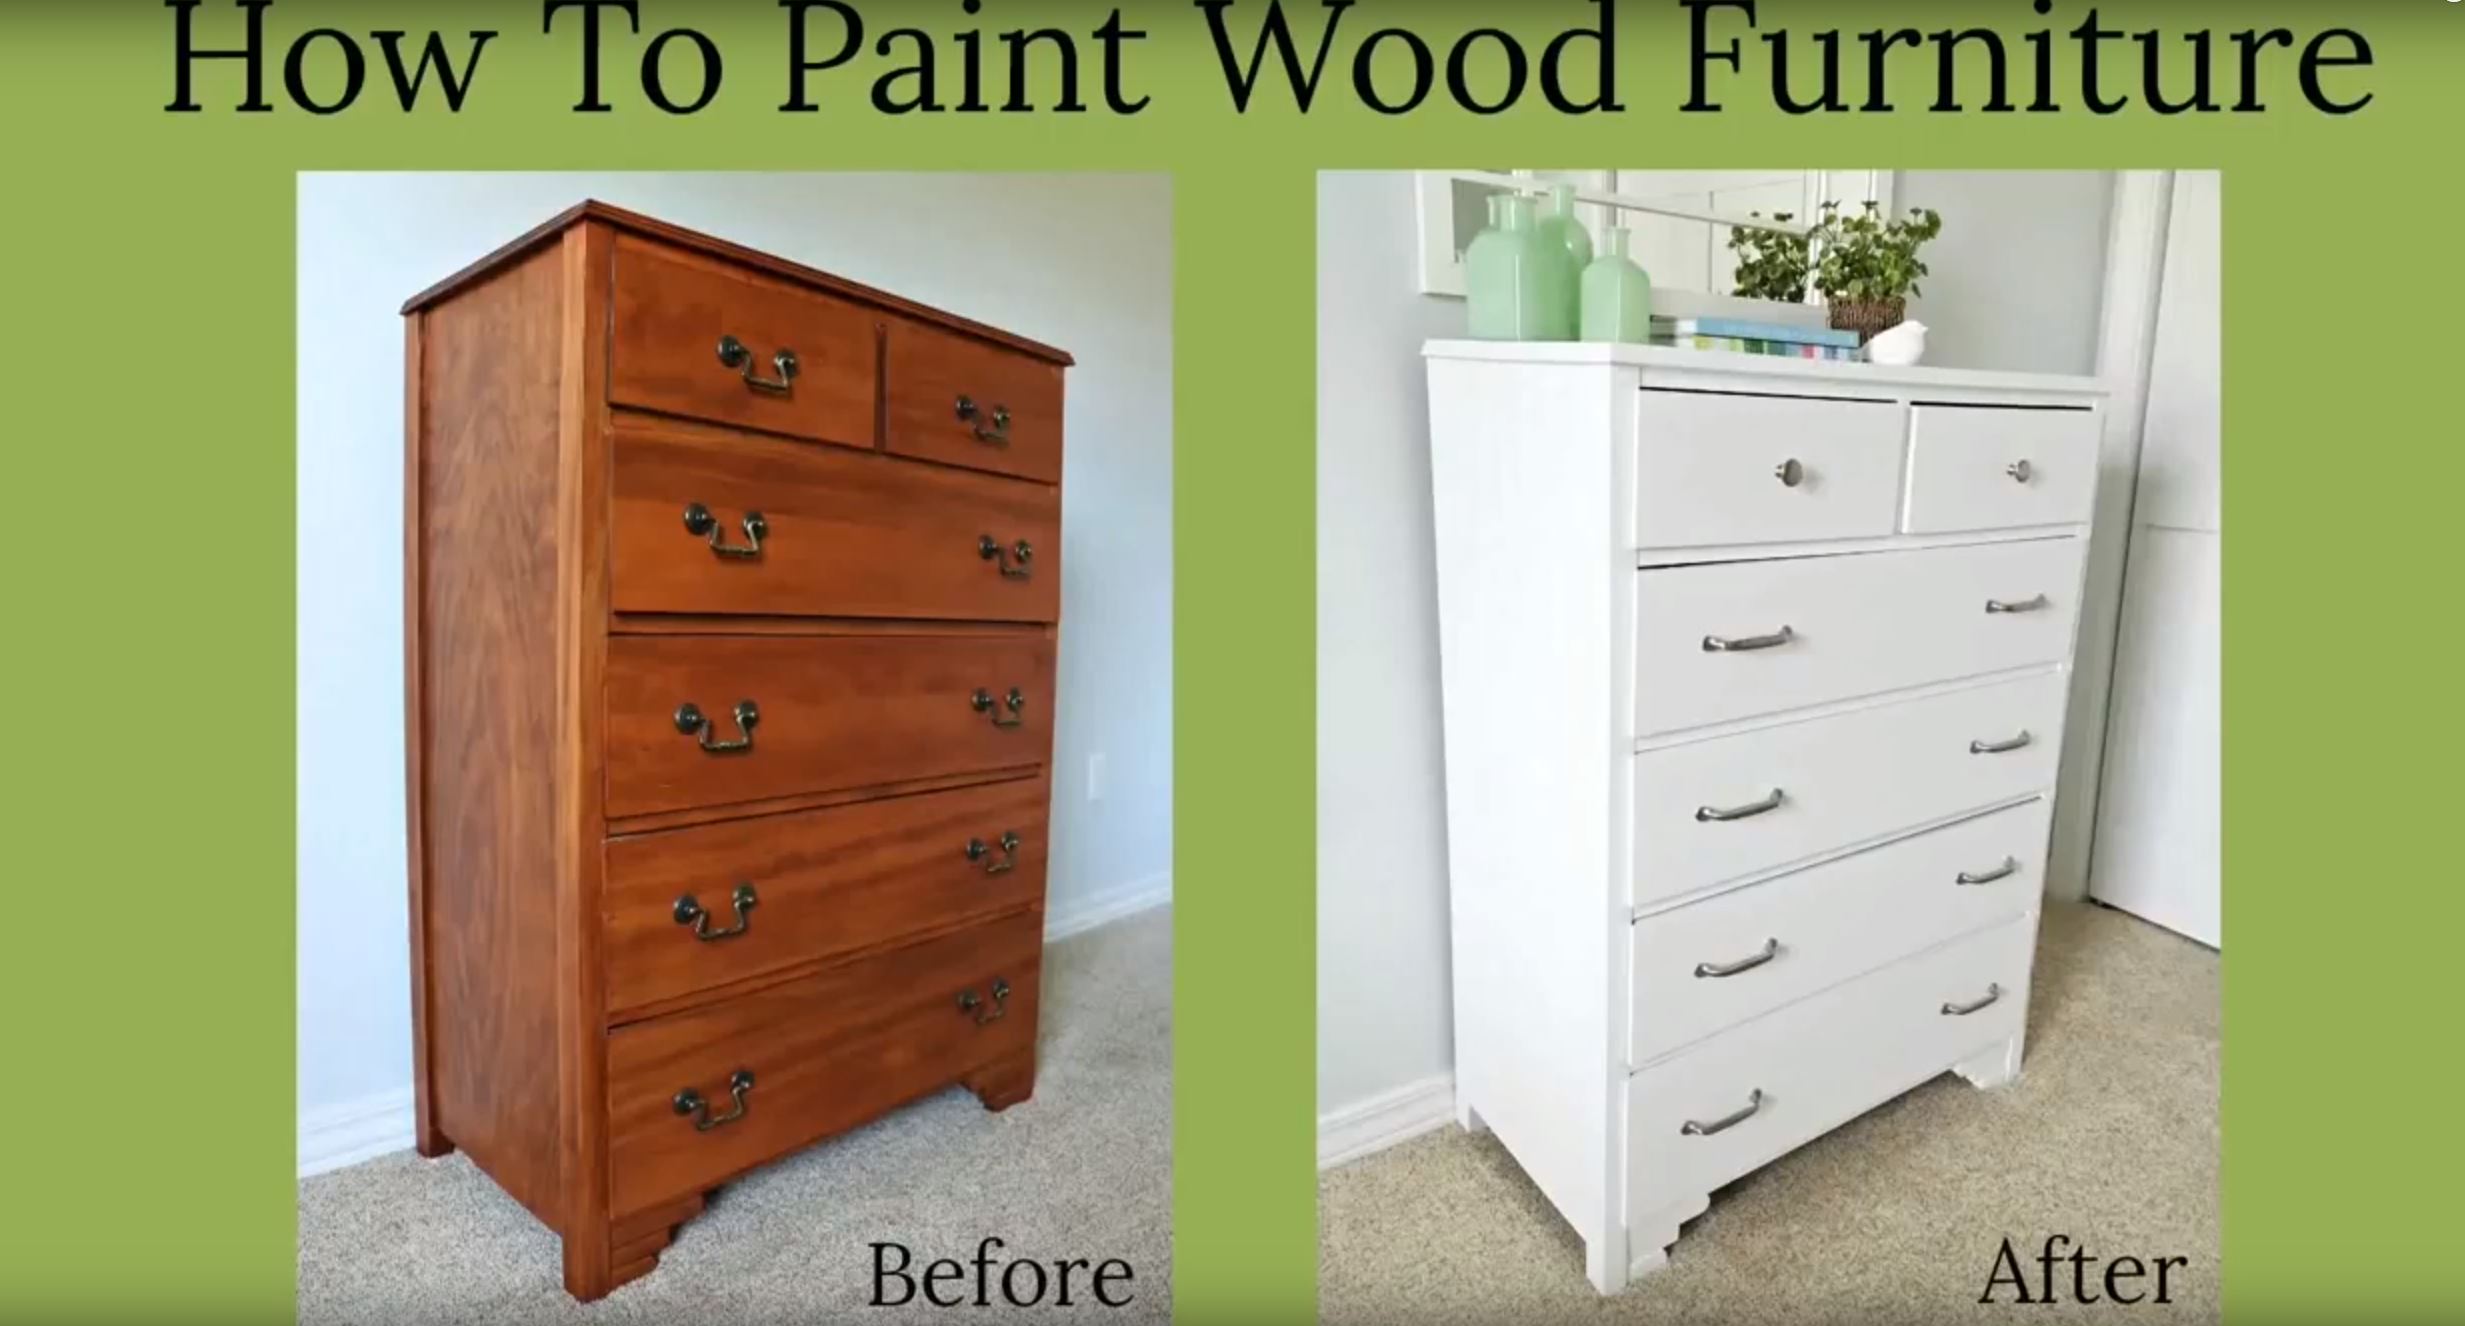 How To Paint Wood Furniture